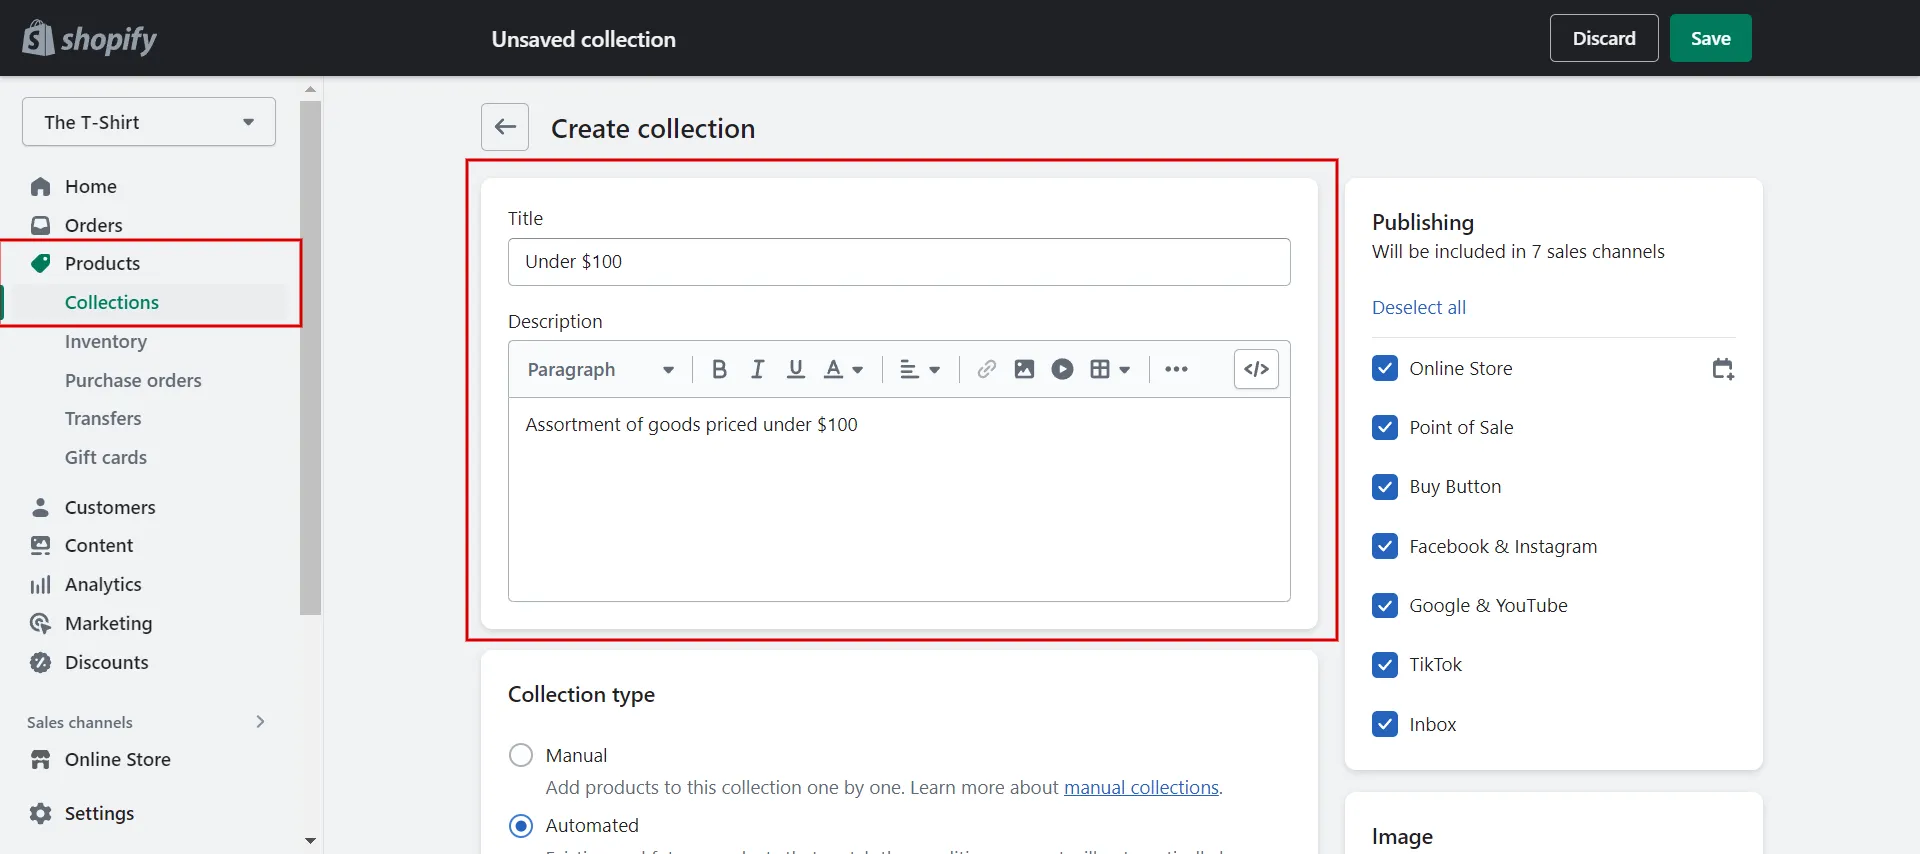 Create a title and description for collections.